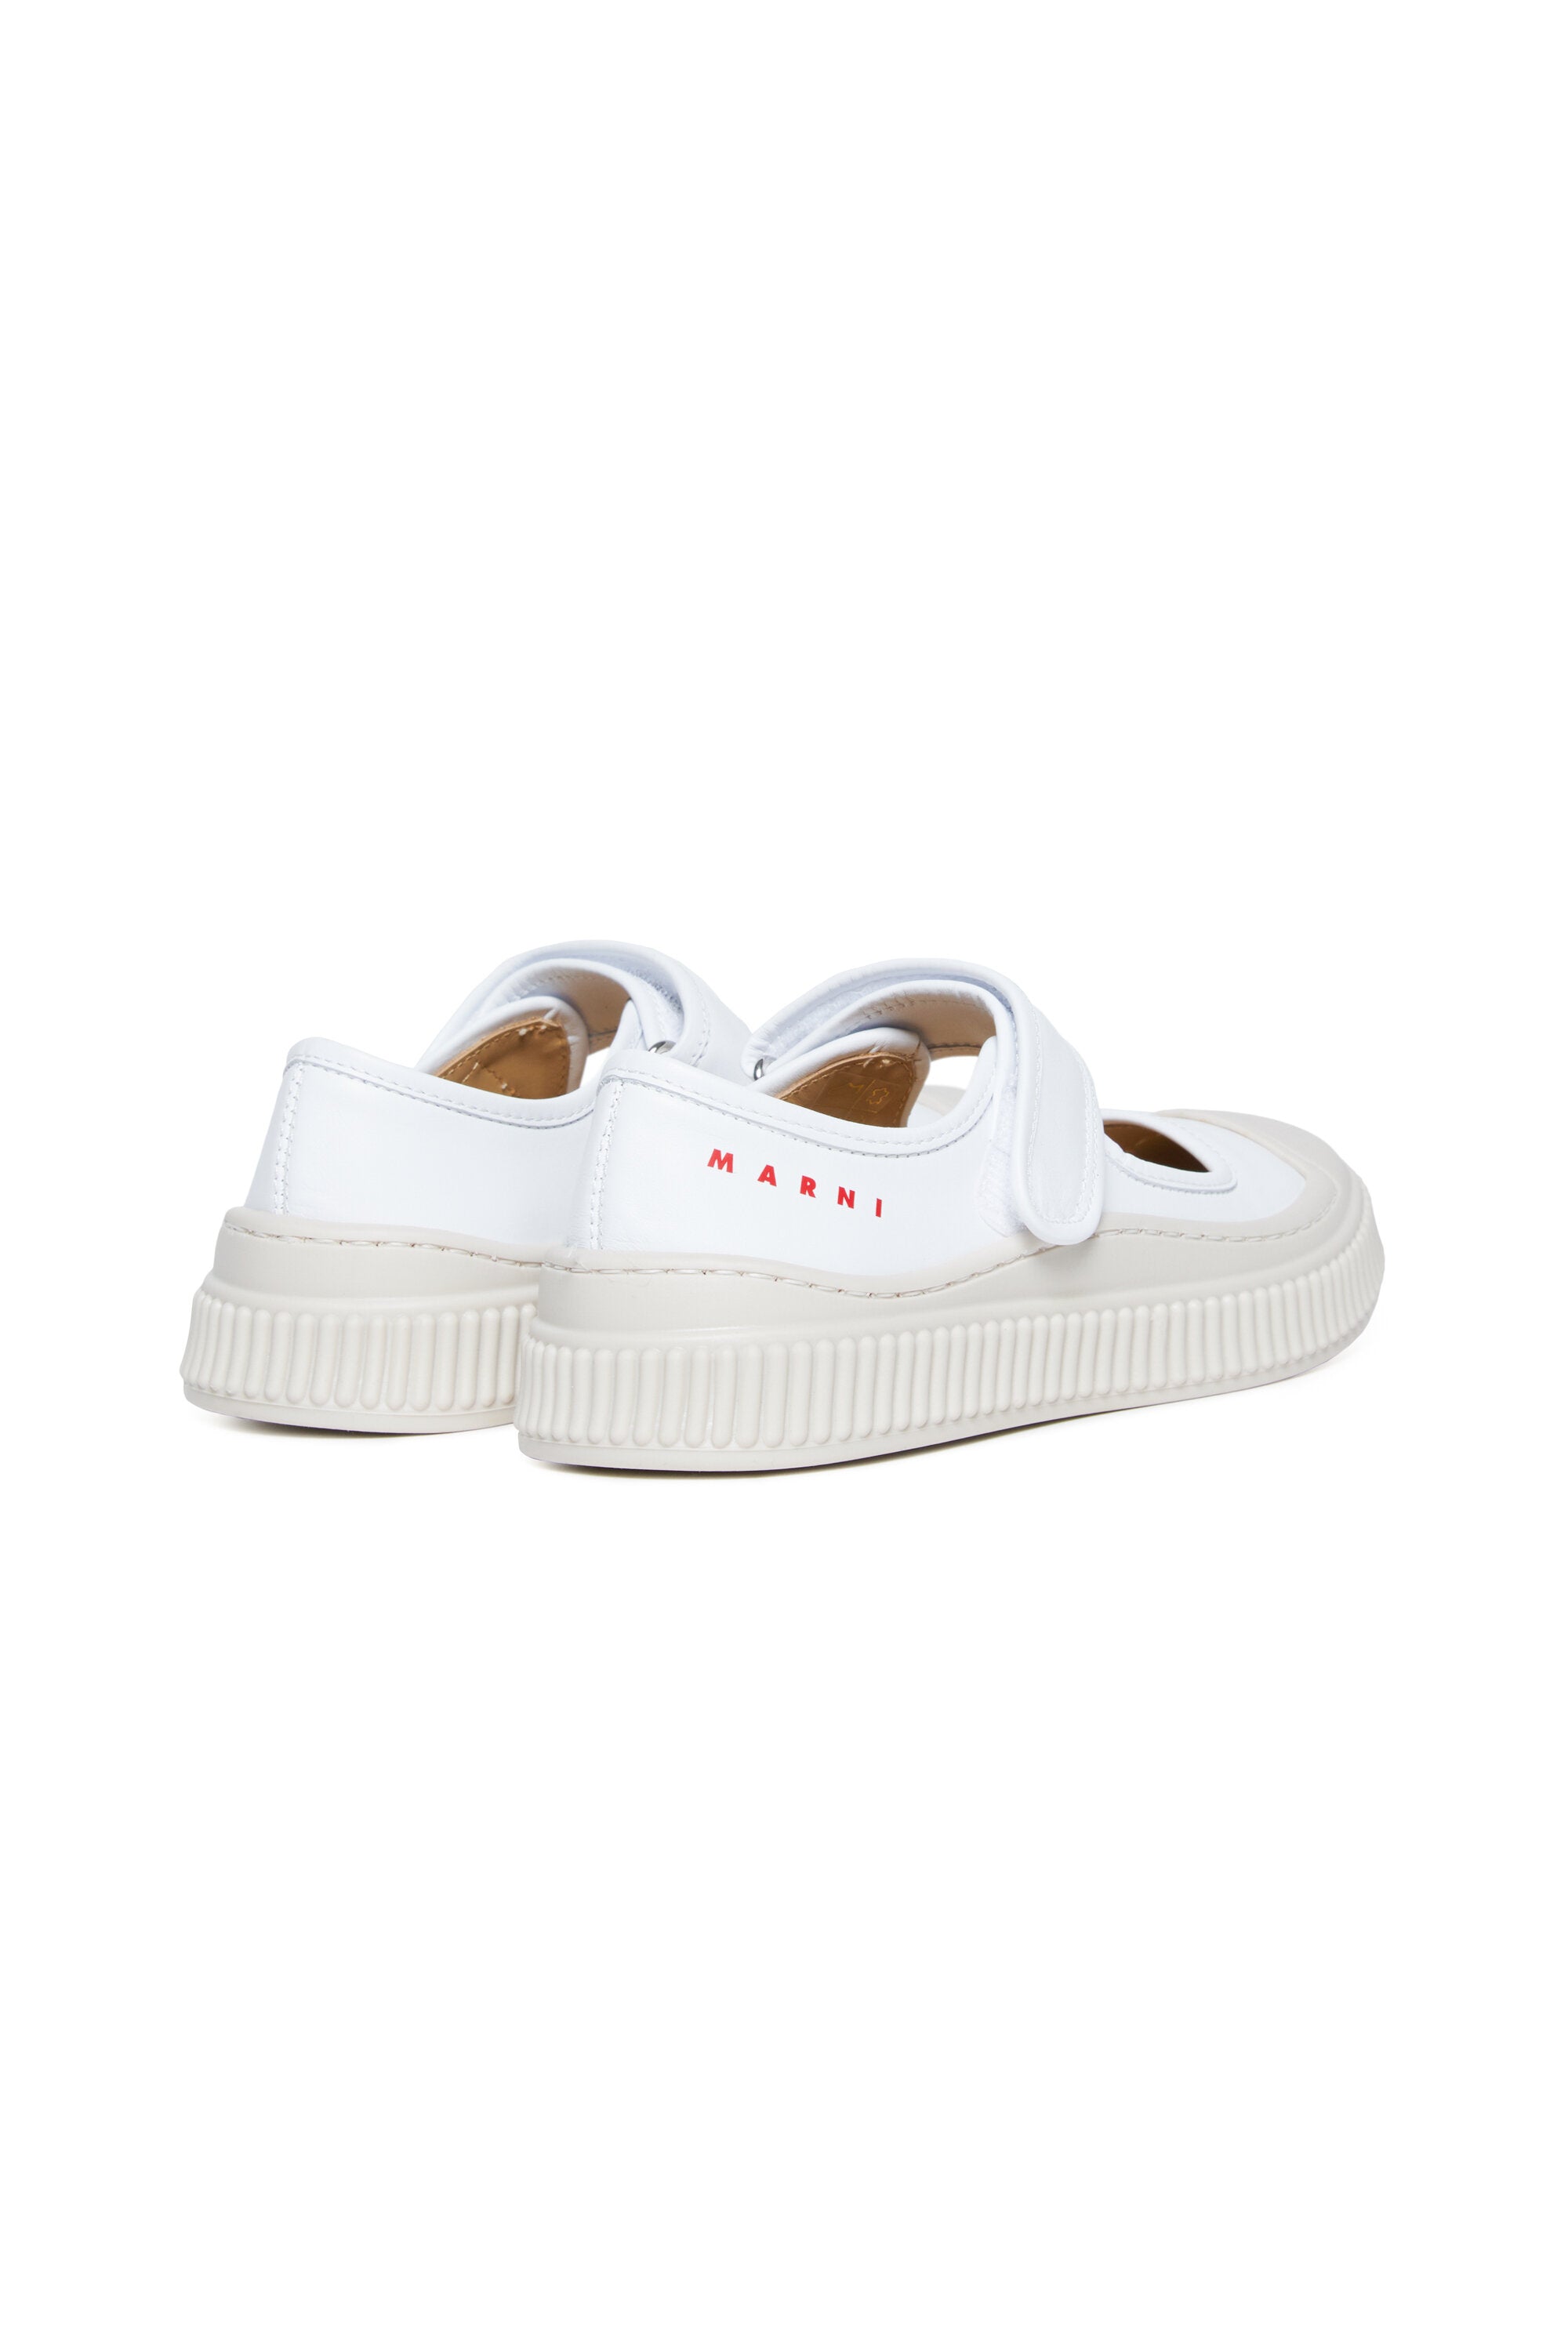 Pablo Mary Jane leather low top sneakers